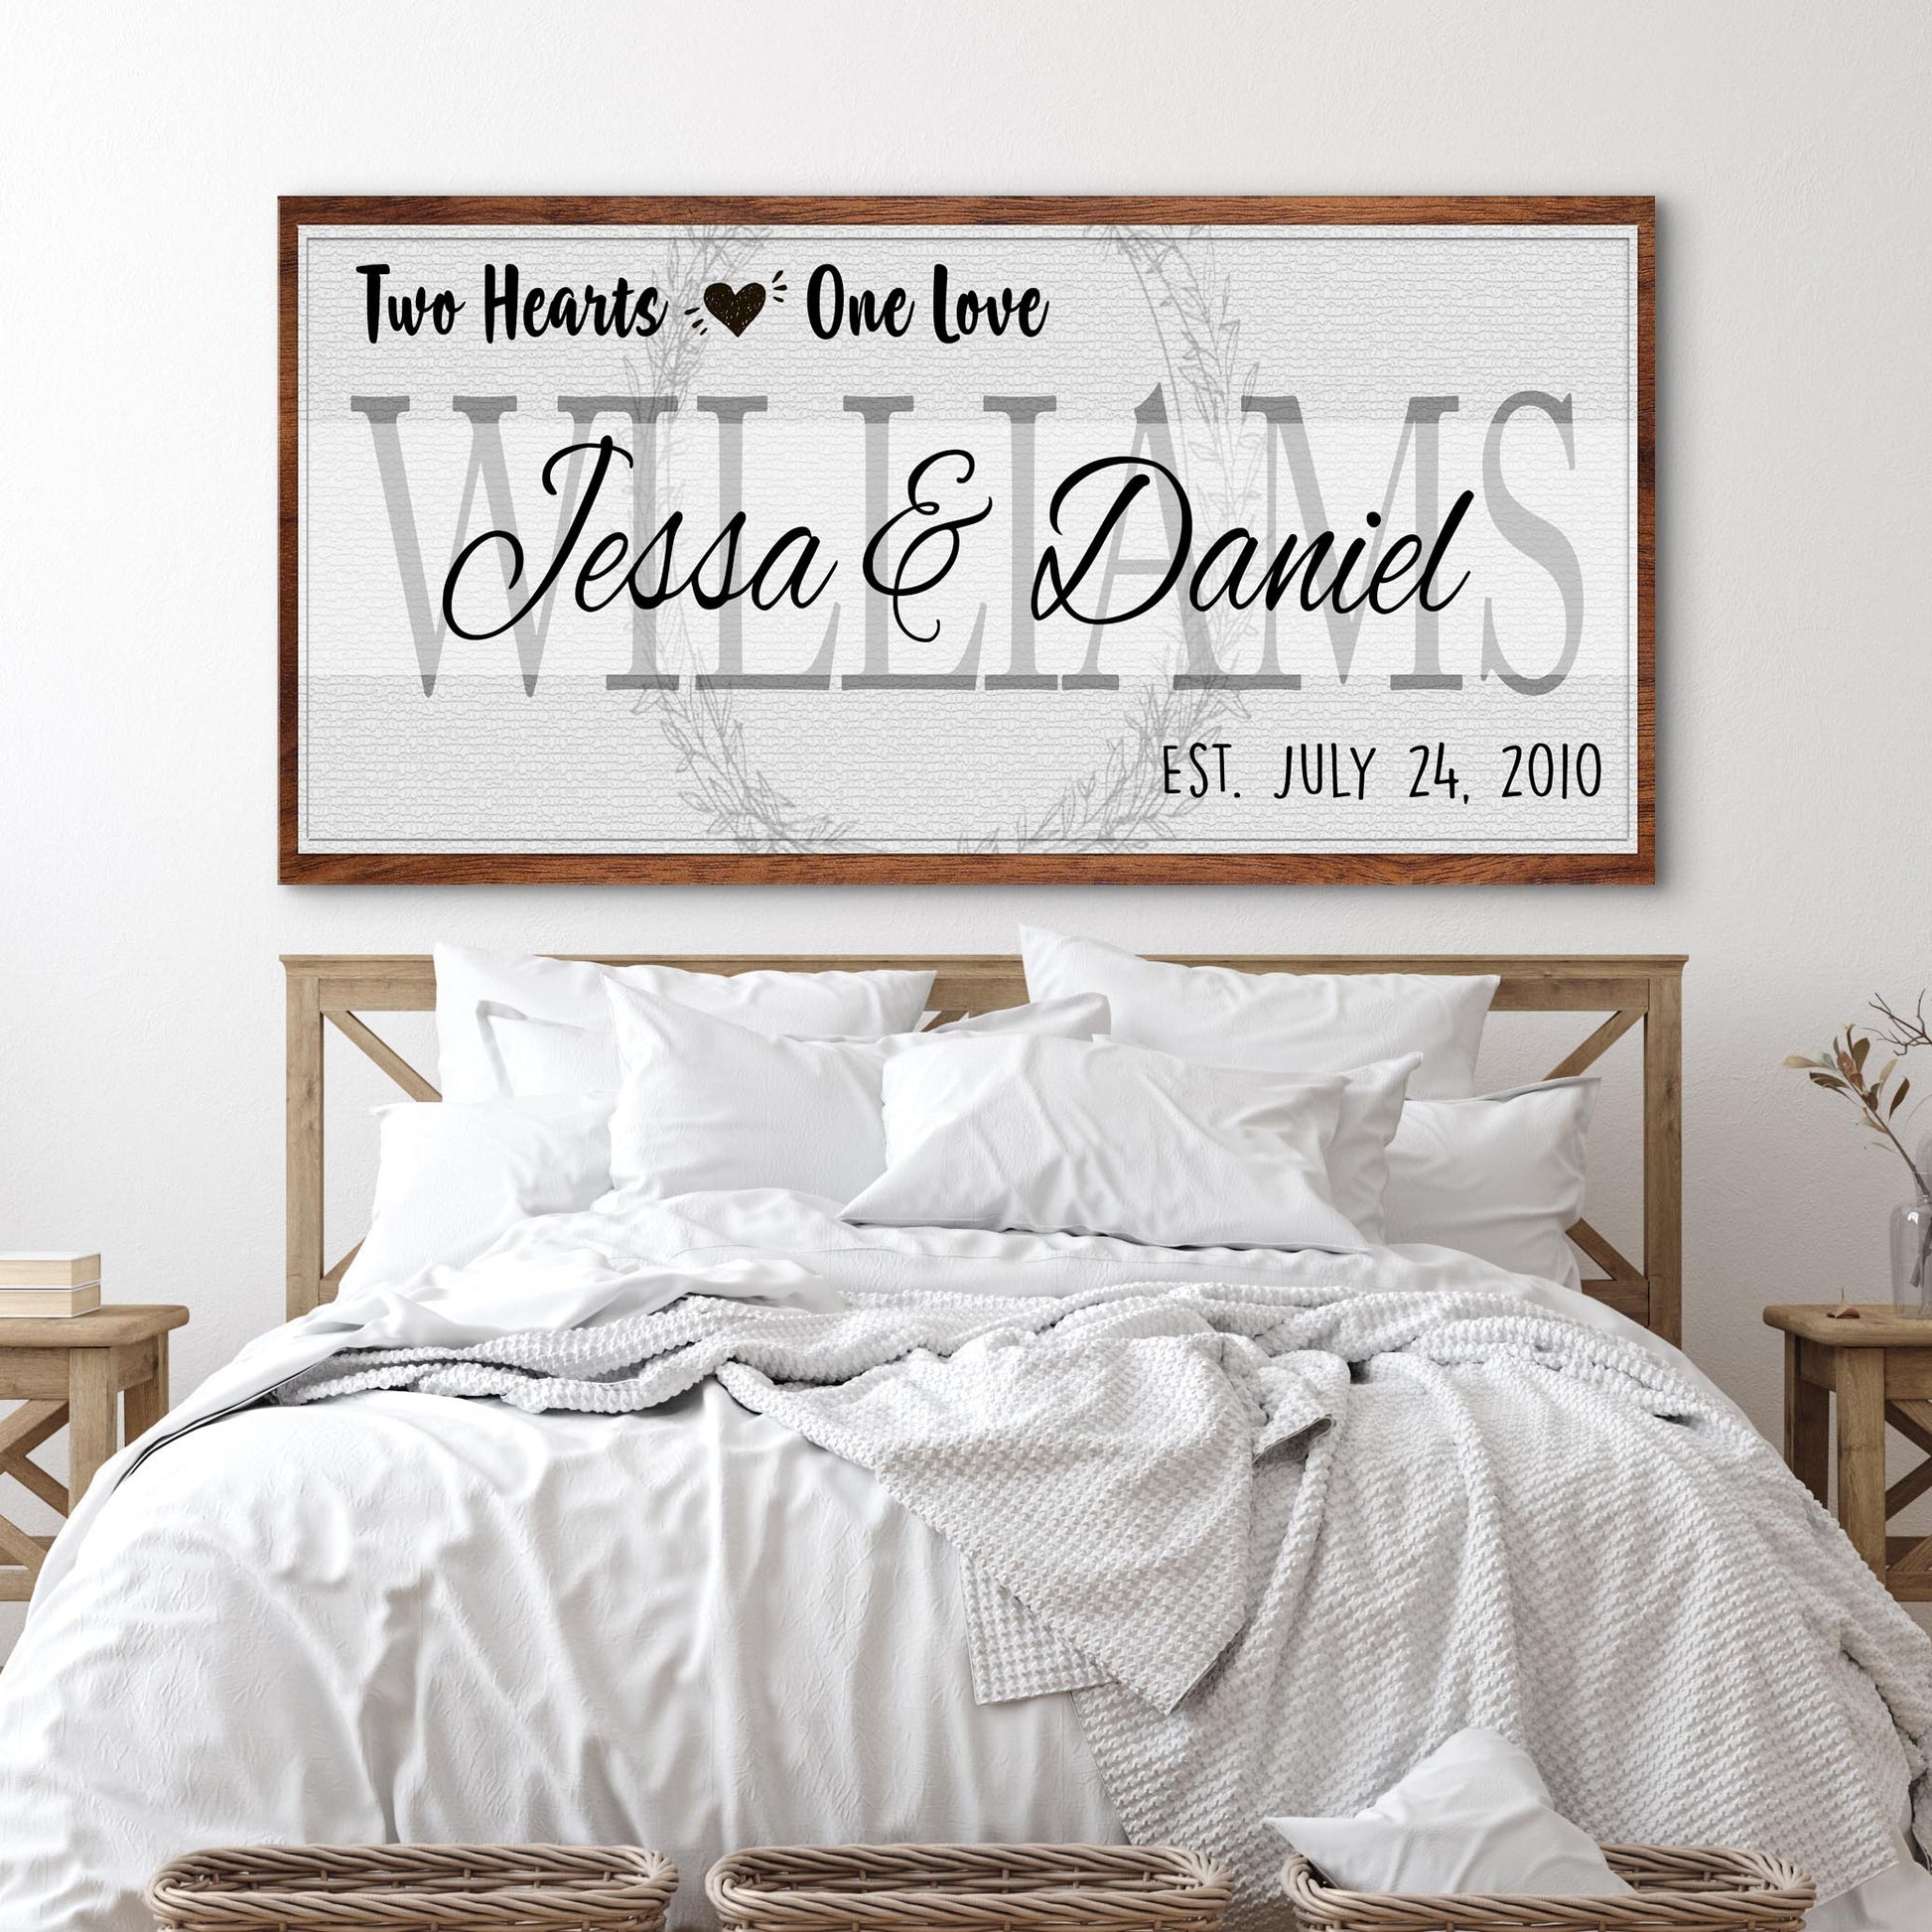 Two Hearts One Love Couple Canvas (Ready to hang) - Wall Art Image by Tailored Canvases